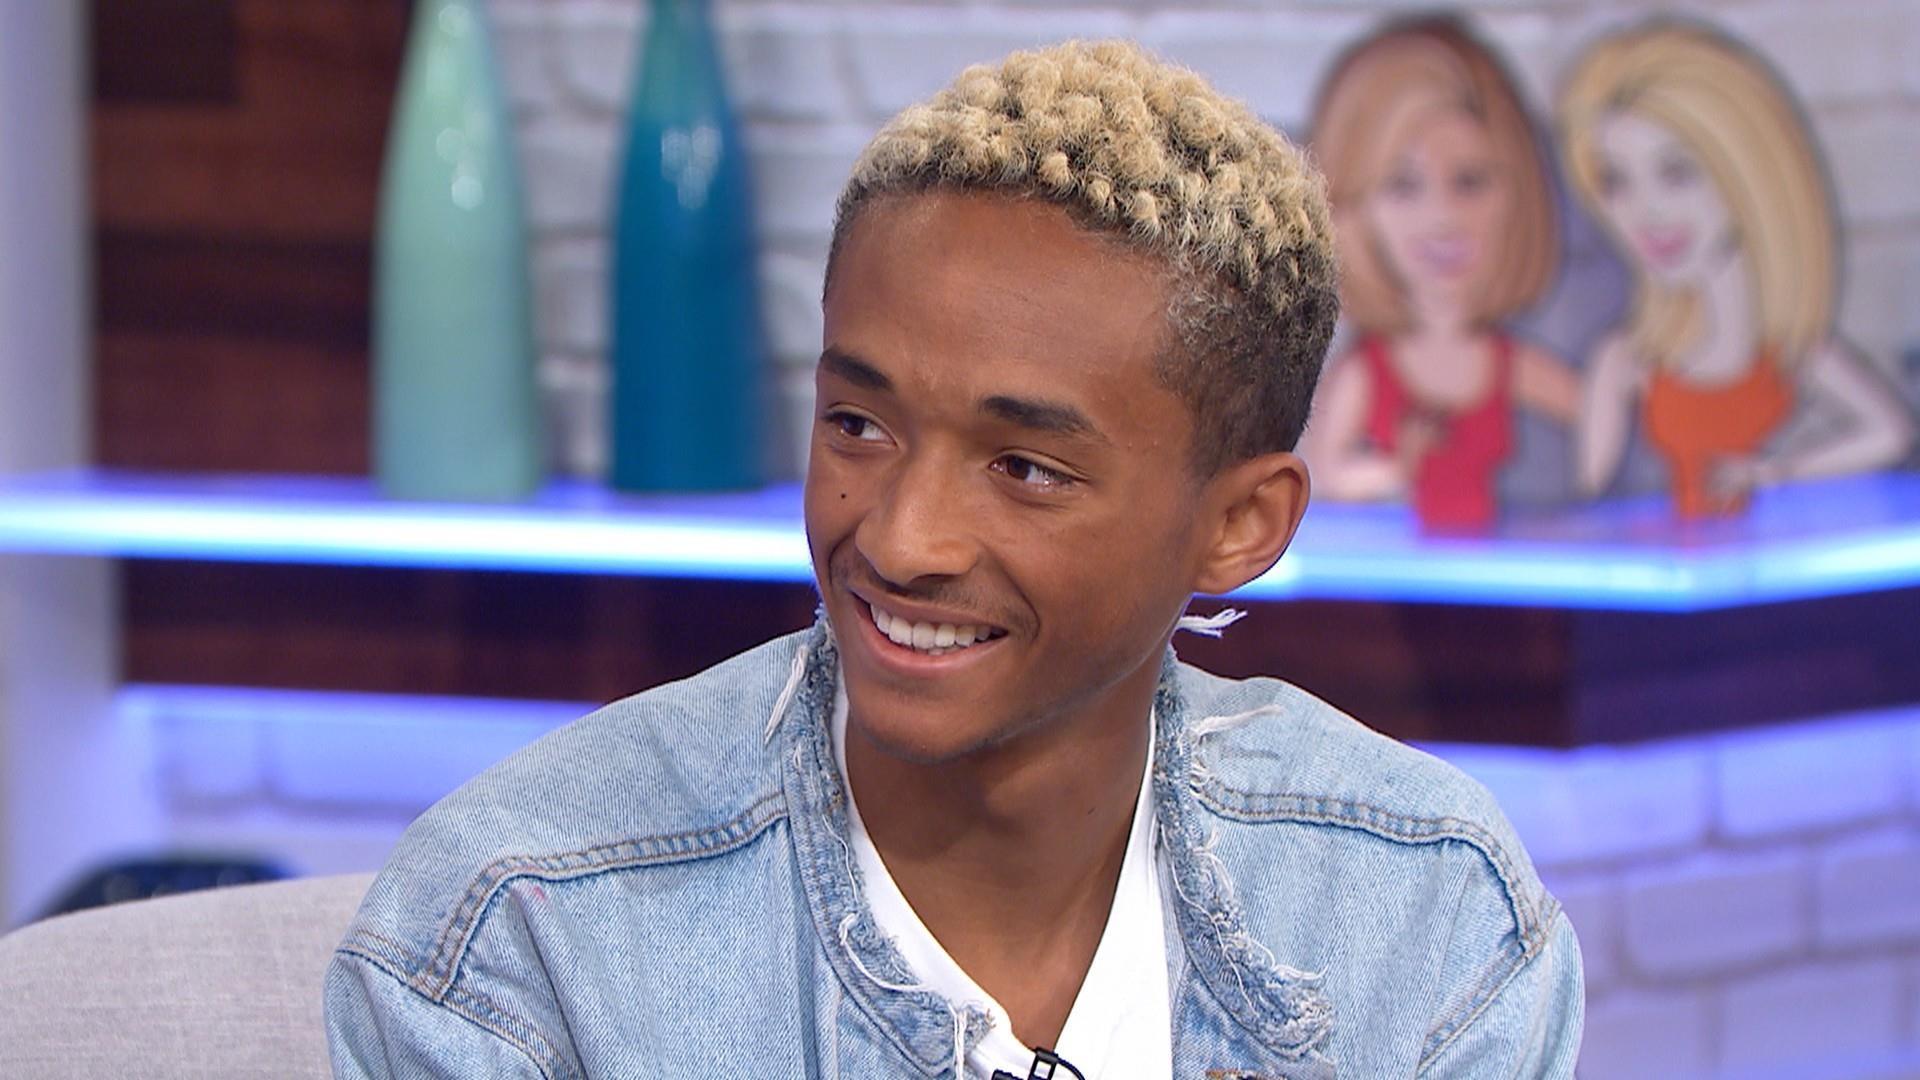 Jaden Smith named one of Time magazine's most influential teens